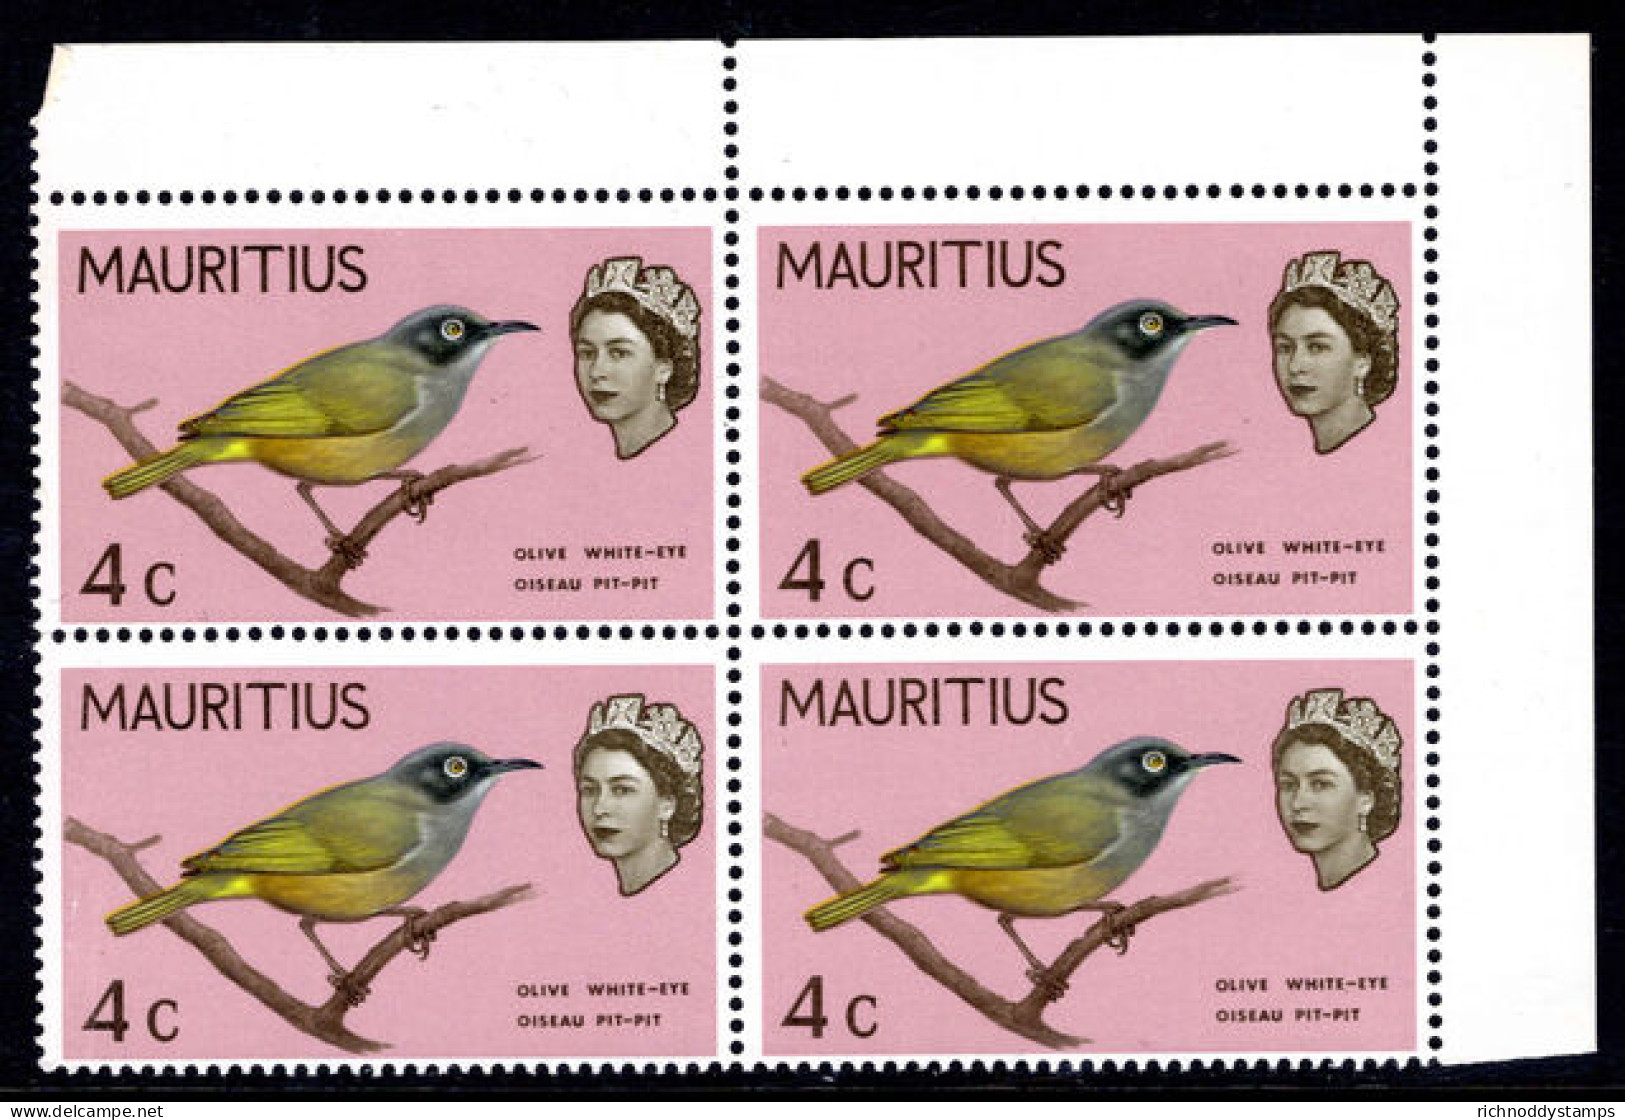 Mauritius 1965 4c With Minor Variety Nicked Branch Block Of 4 Unmounted Mint. - Maurice (1968-...)